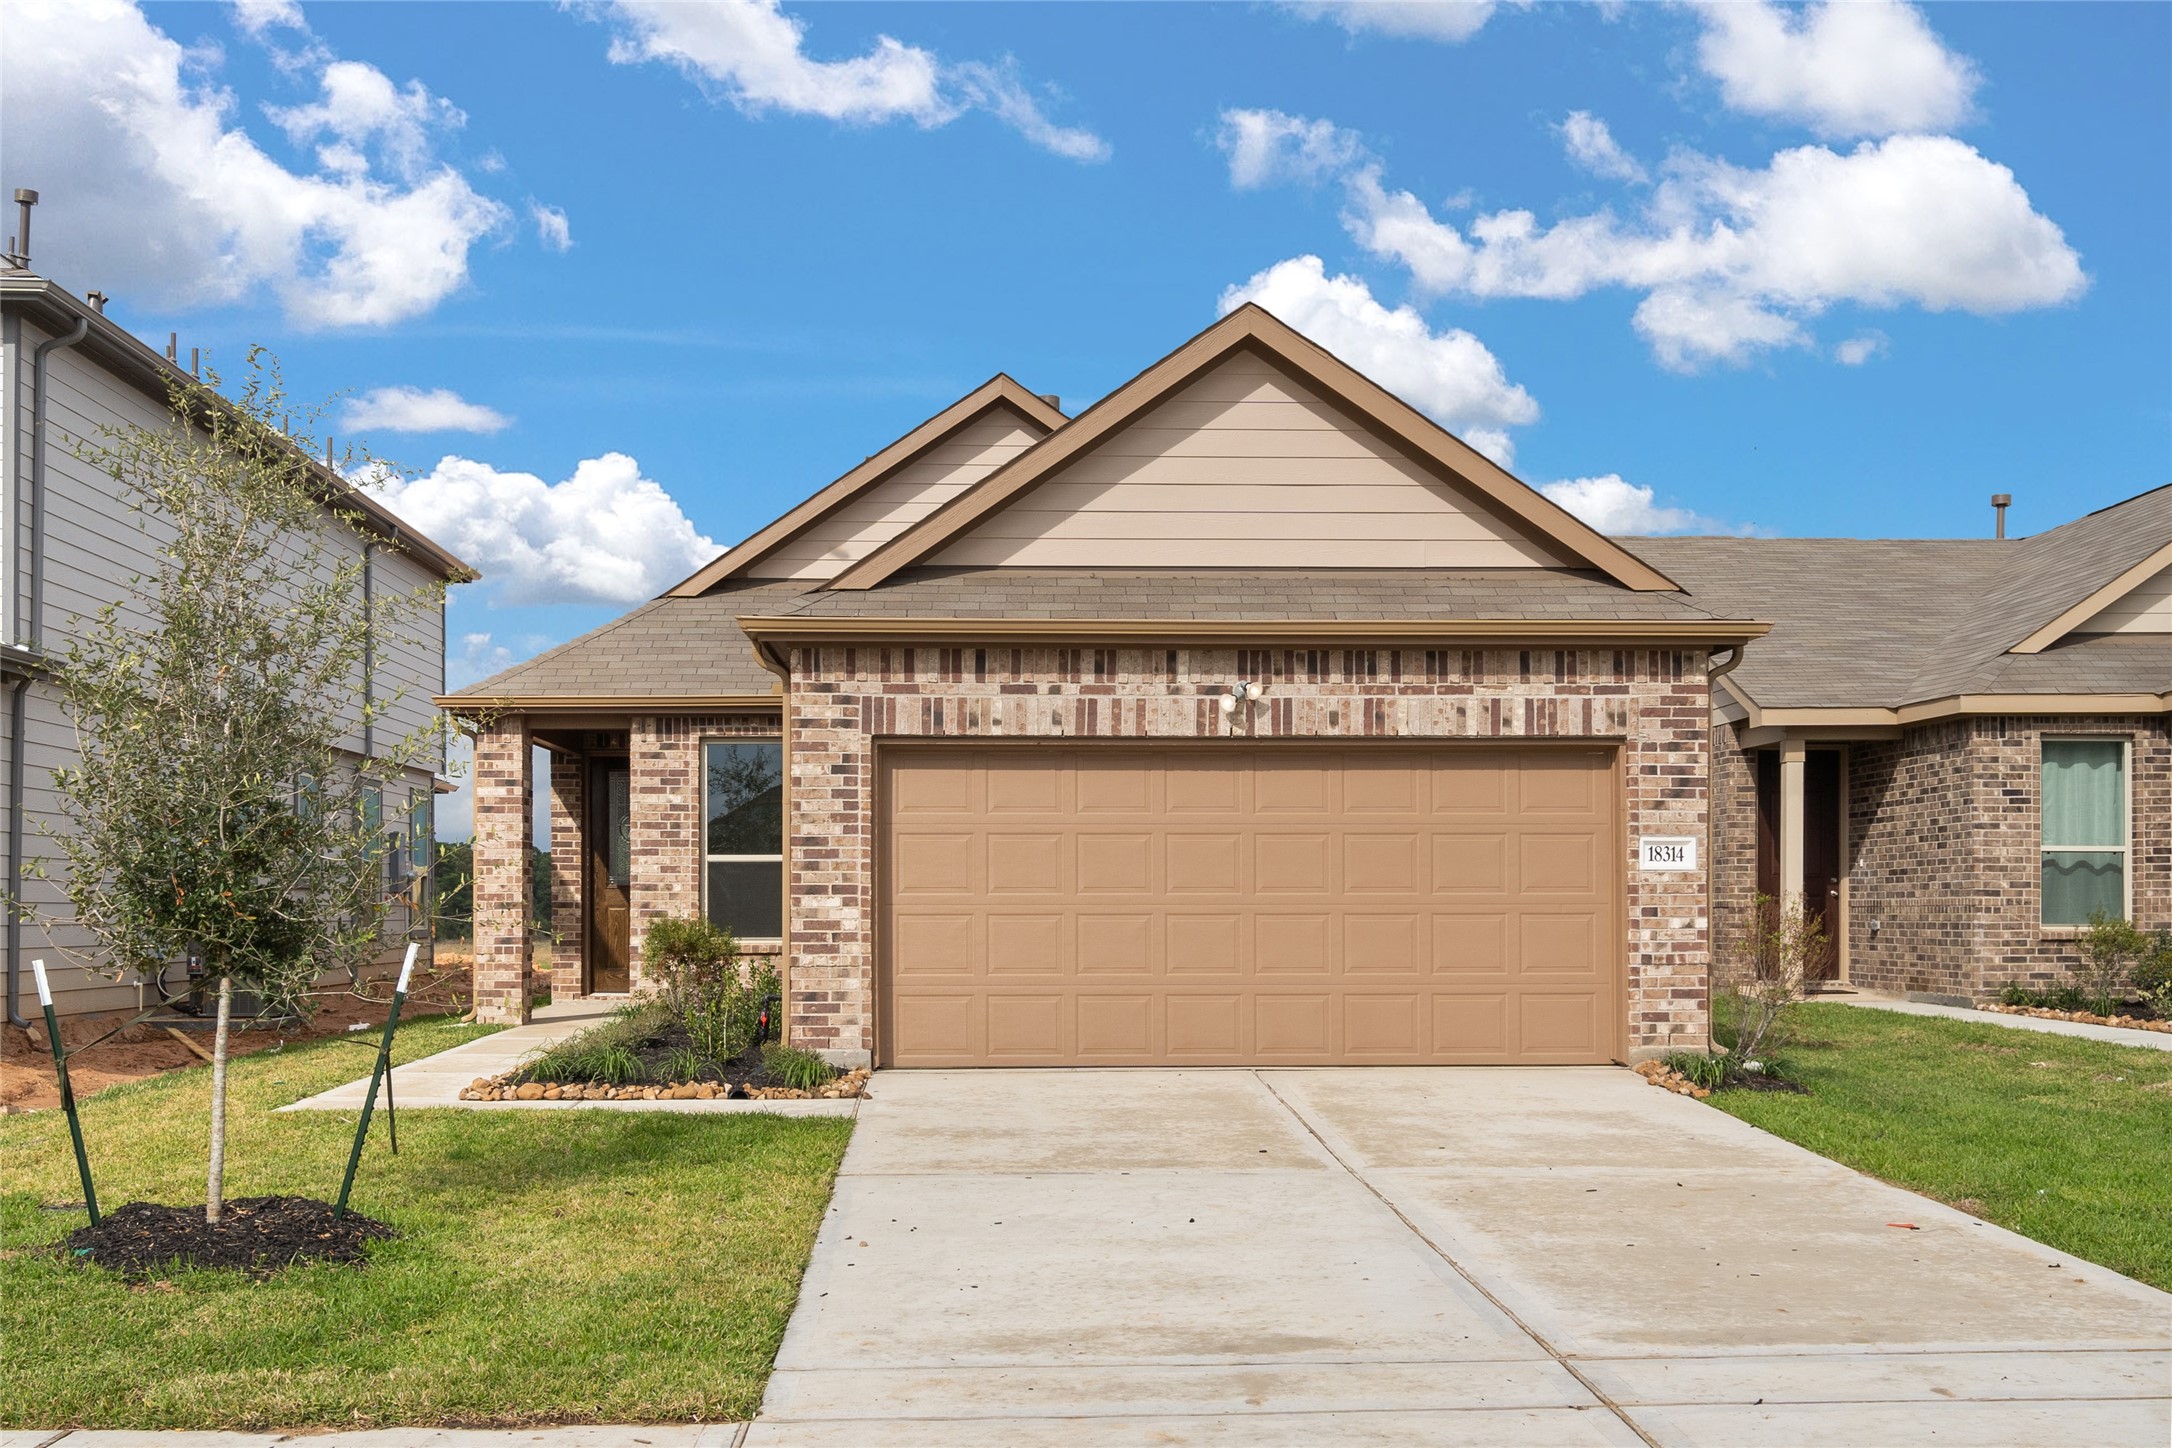 Welcome home to 18314 Willow Bud Trail located in Oakwood Trails zoned to Tomball ISD.